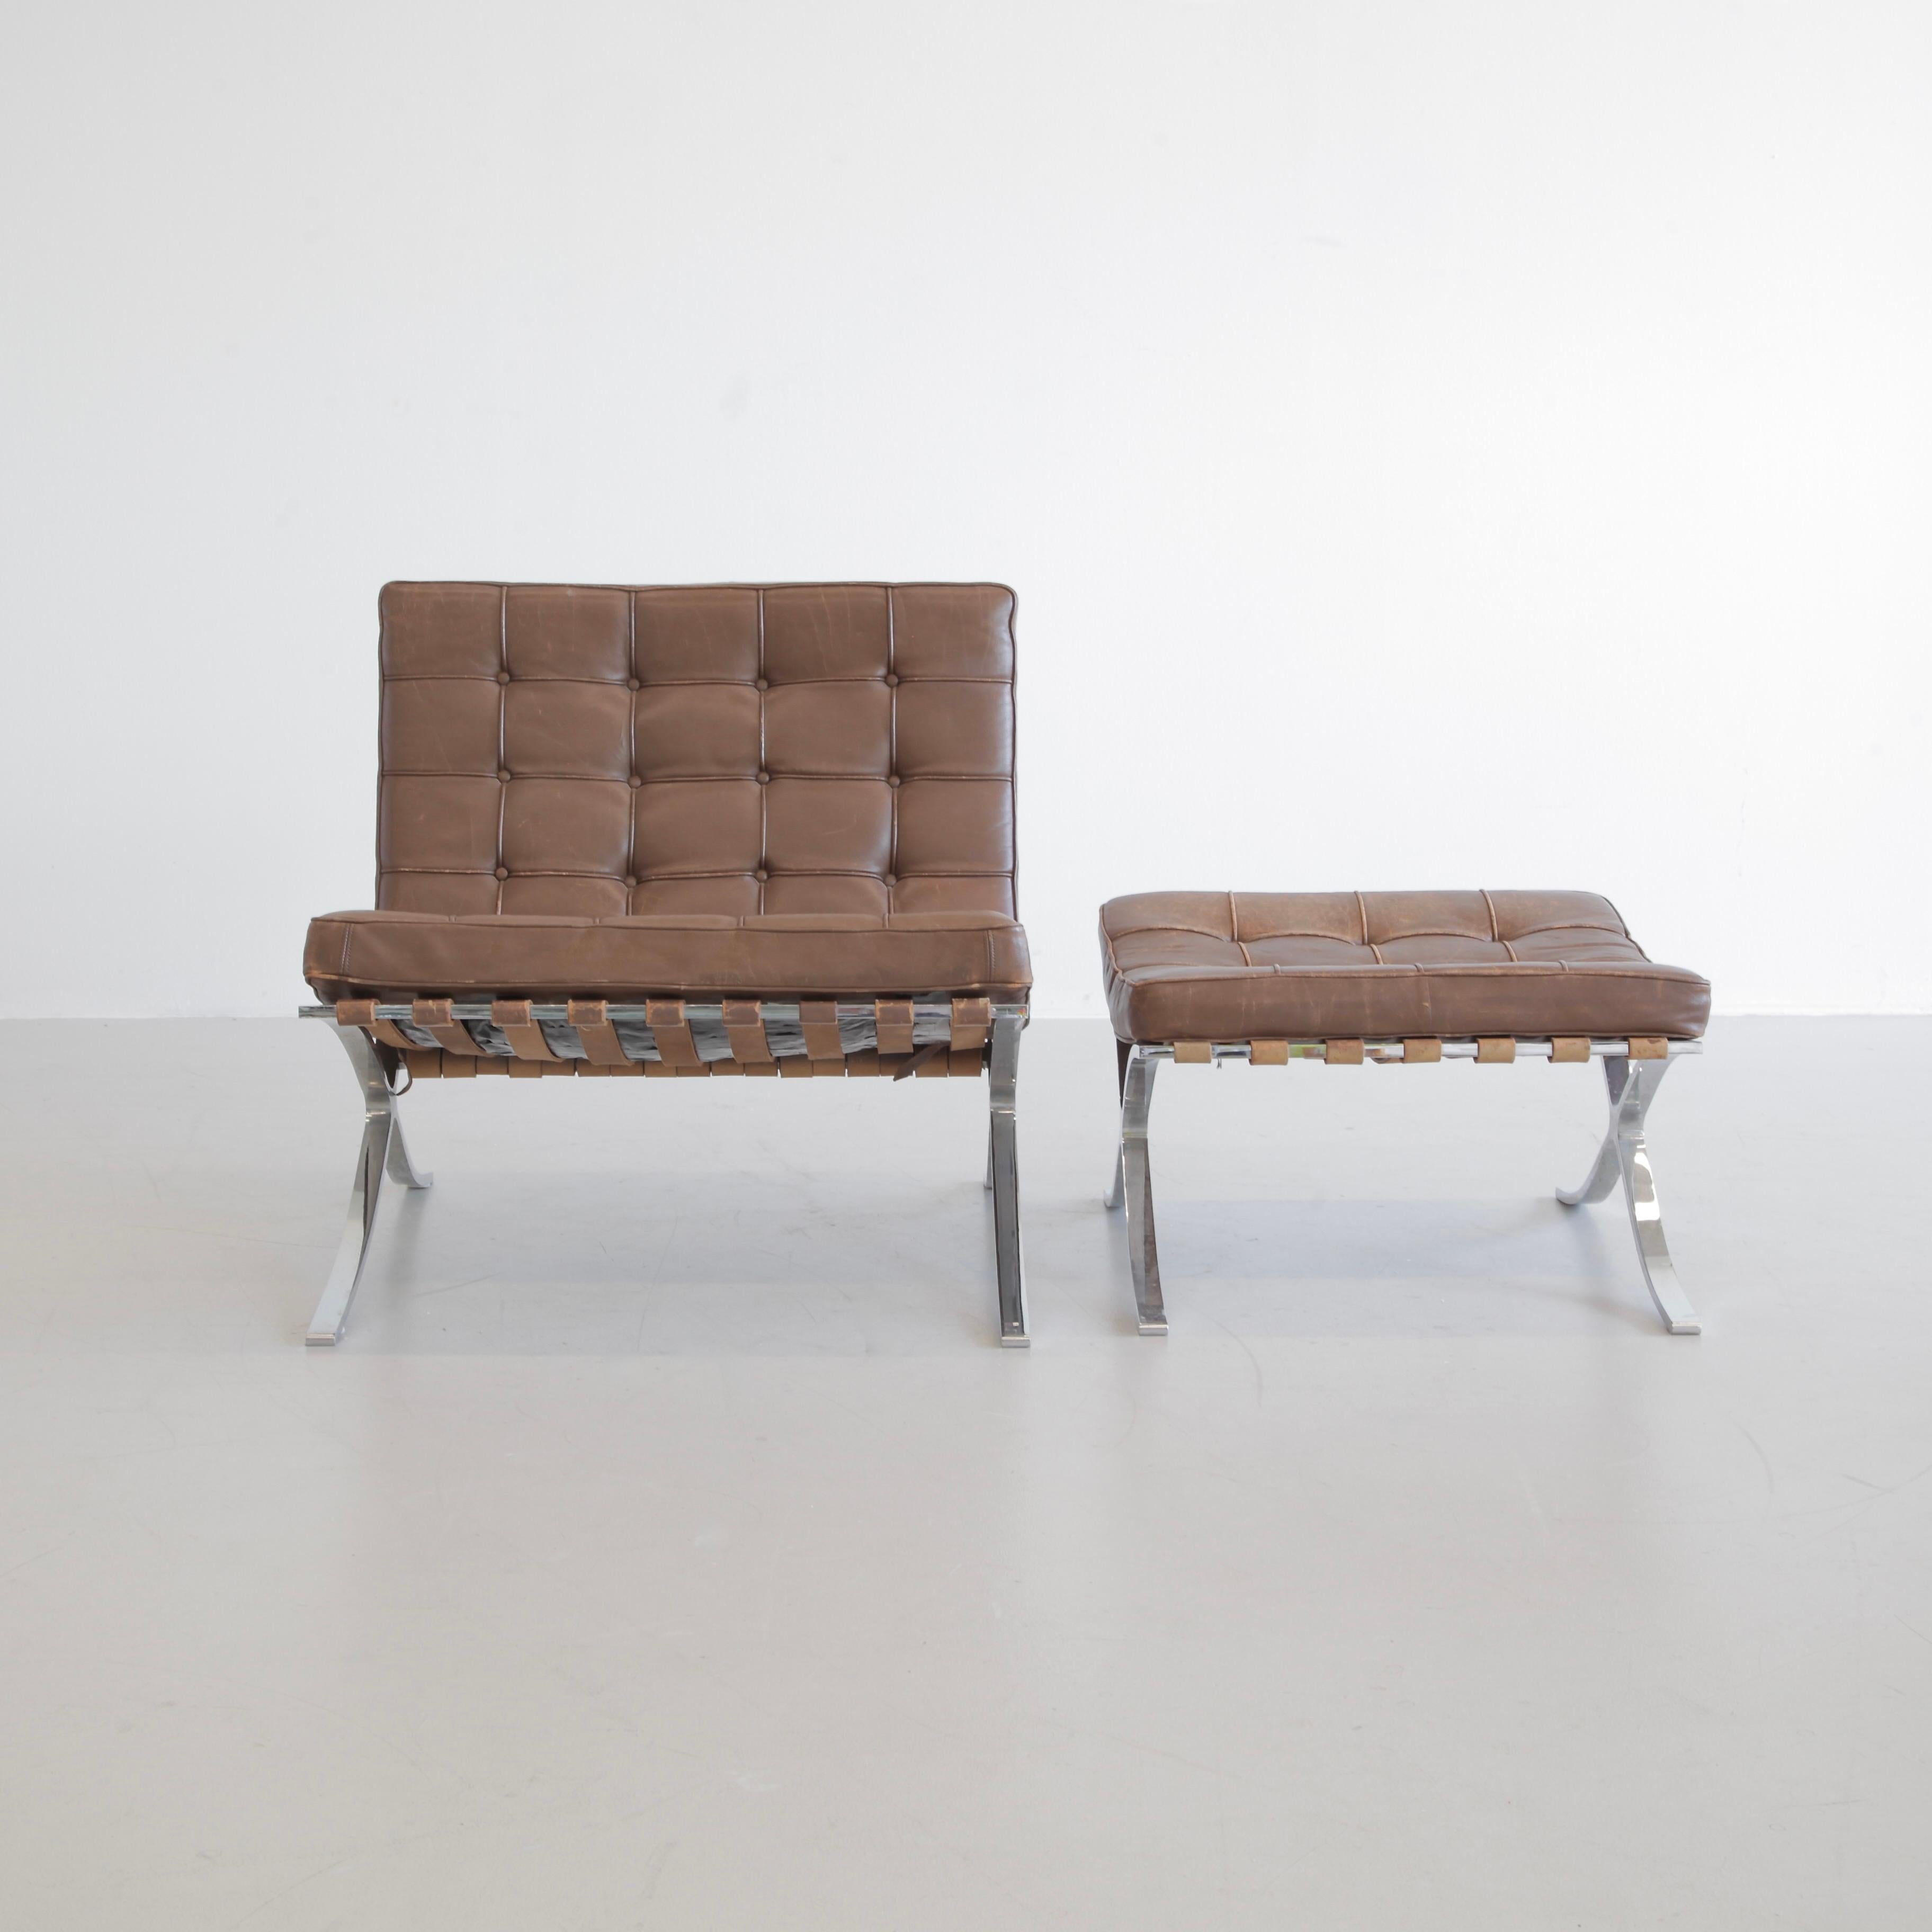 American Vintage Barcelona Chair & Footstool by Knoll International, Early 1970s For Sale